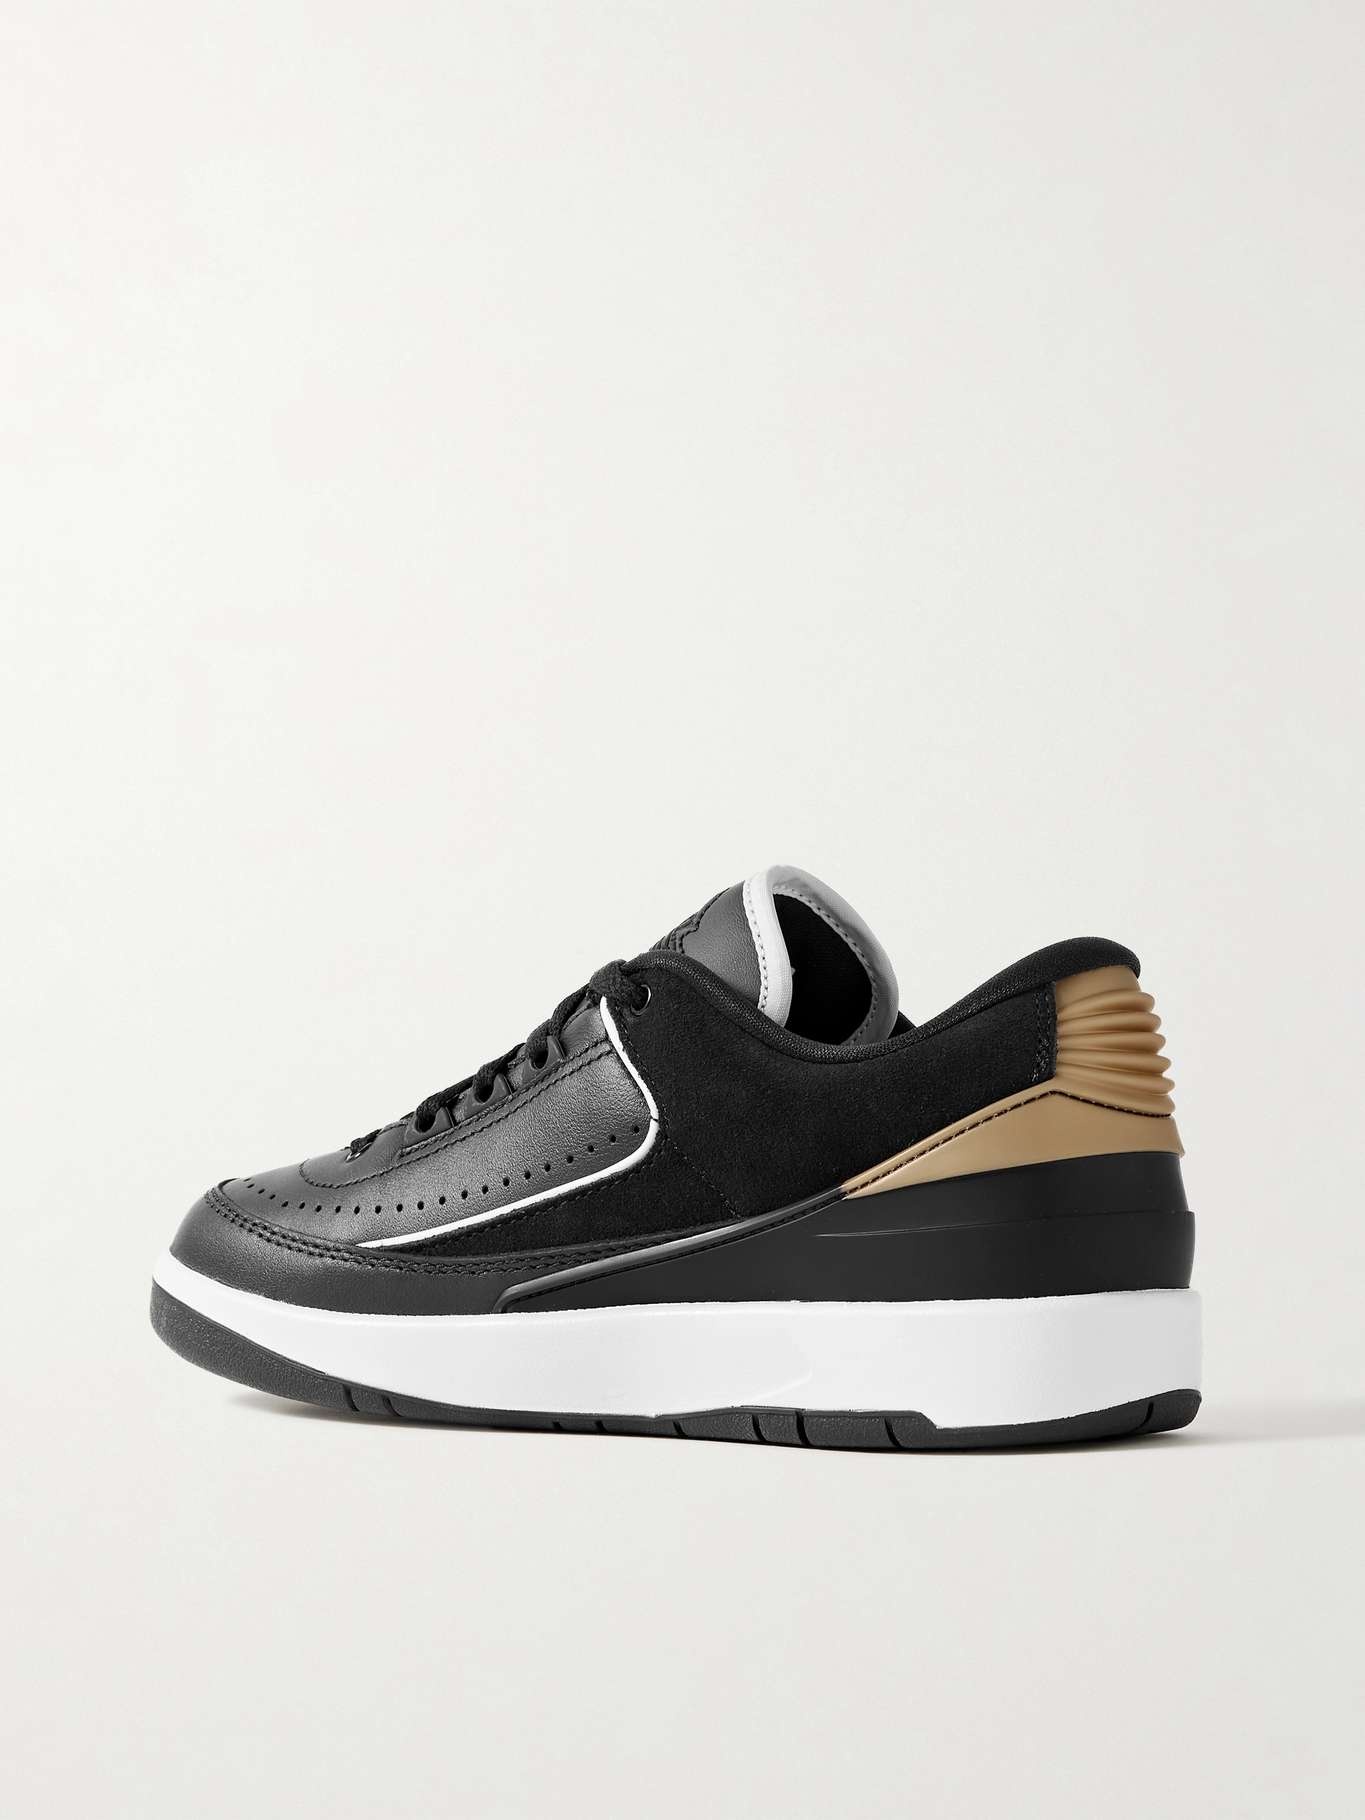 Air Jordan 2 Retro rubber and suede-trimmed leather sneakers - 3